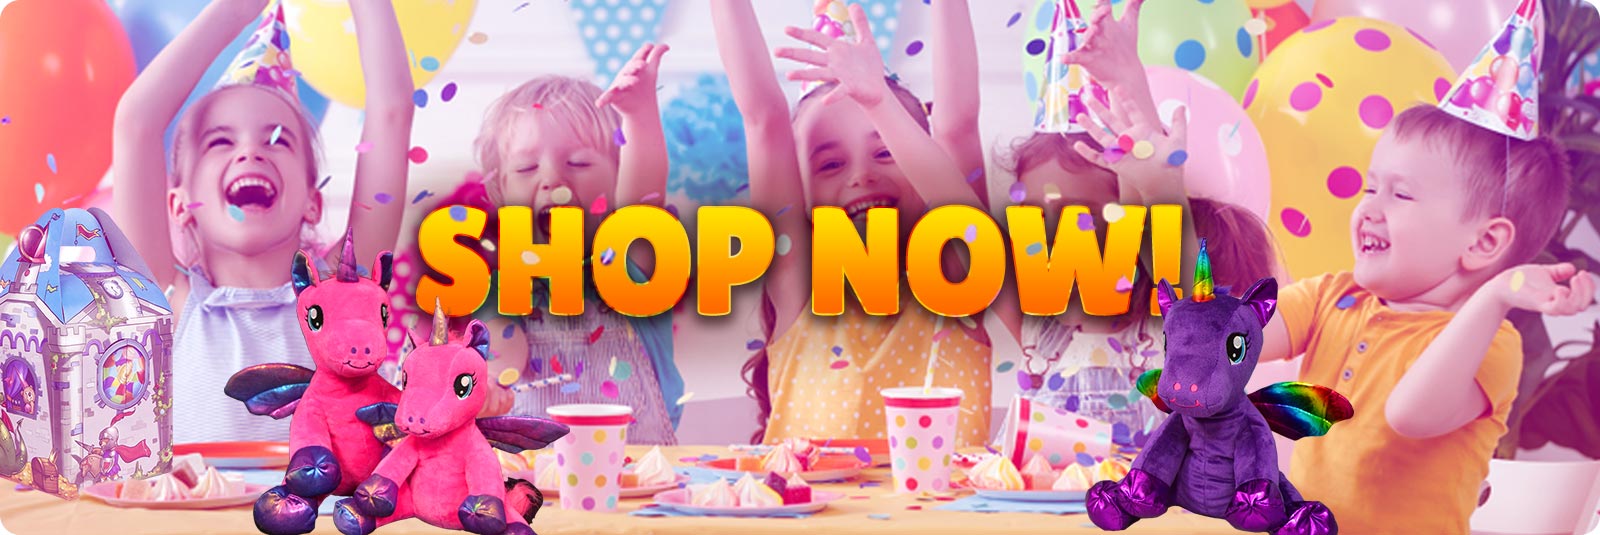 SHOP NOW! text over a picture with children having a birthday party with 2 unicorn plush toys sitting on the sides